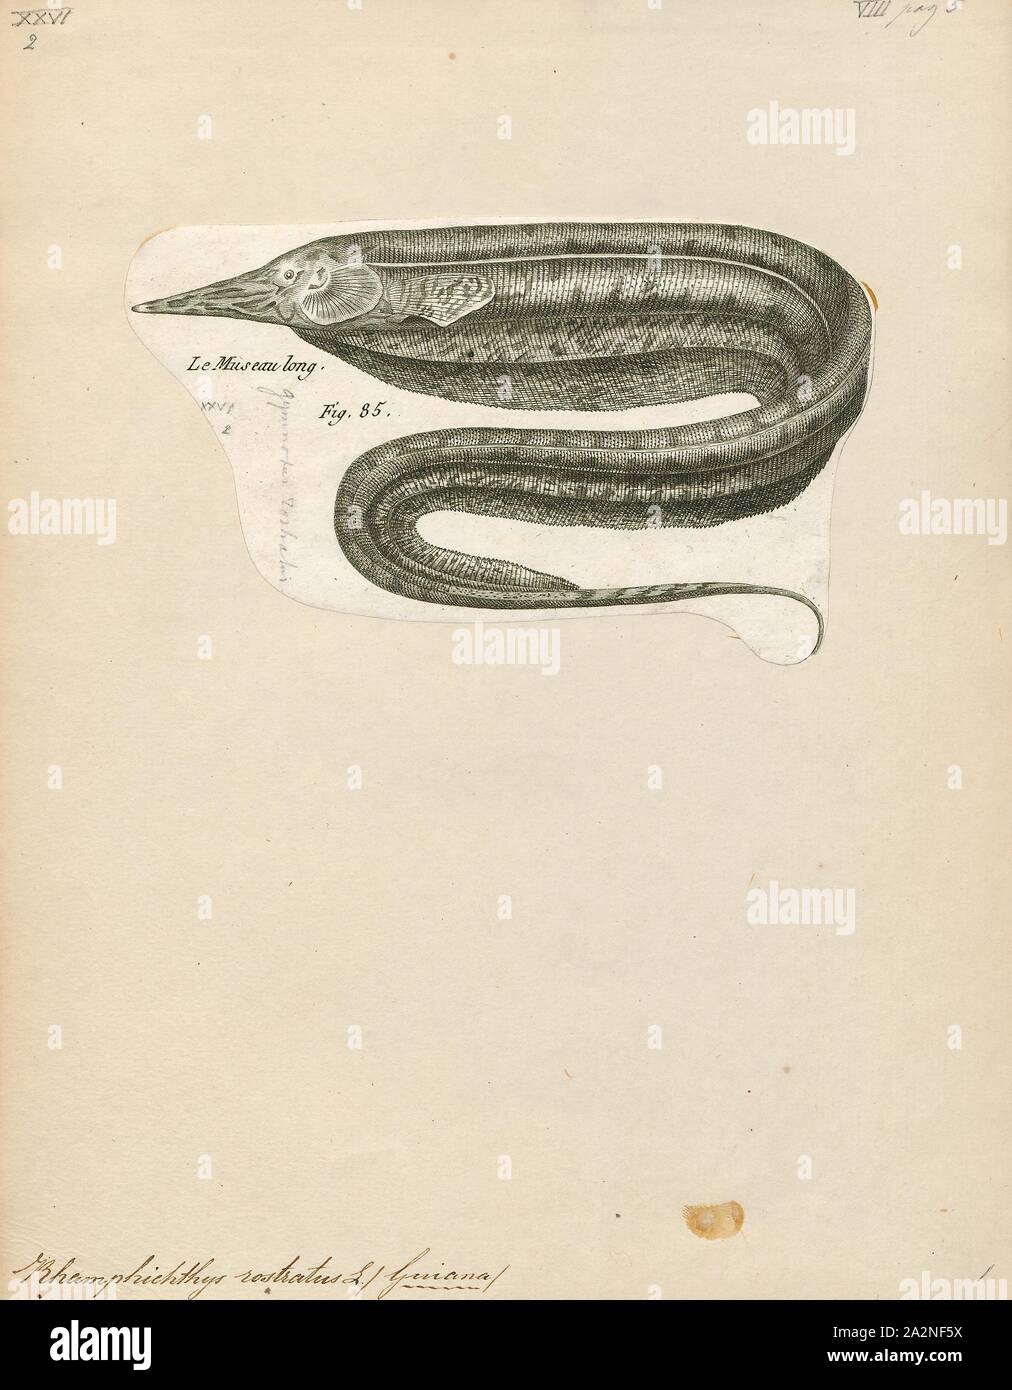 Rhamphichthys rostratus, Print, Rhamphichthys is a genus of South American sand knifefishes found in the Amazon, Orinoco, Río de la Plata and Paranaíba basins, as well as rivers in the Guianas. They are found along vegetated edges or near the bottom of rivers; they are often quite common in deep river channels.Rhamphichthys feed on small invertebrates. Little else is known about their behavior, but observations in aquariums indicate that they are nocturnal. They have a relatively long slender snout and depending on the exact species reach up to 26.5–100 cm (0.9–3.3 ft) in total length., 1788 Stock Photo